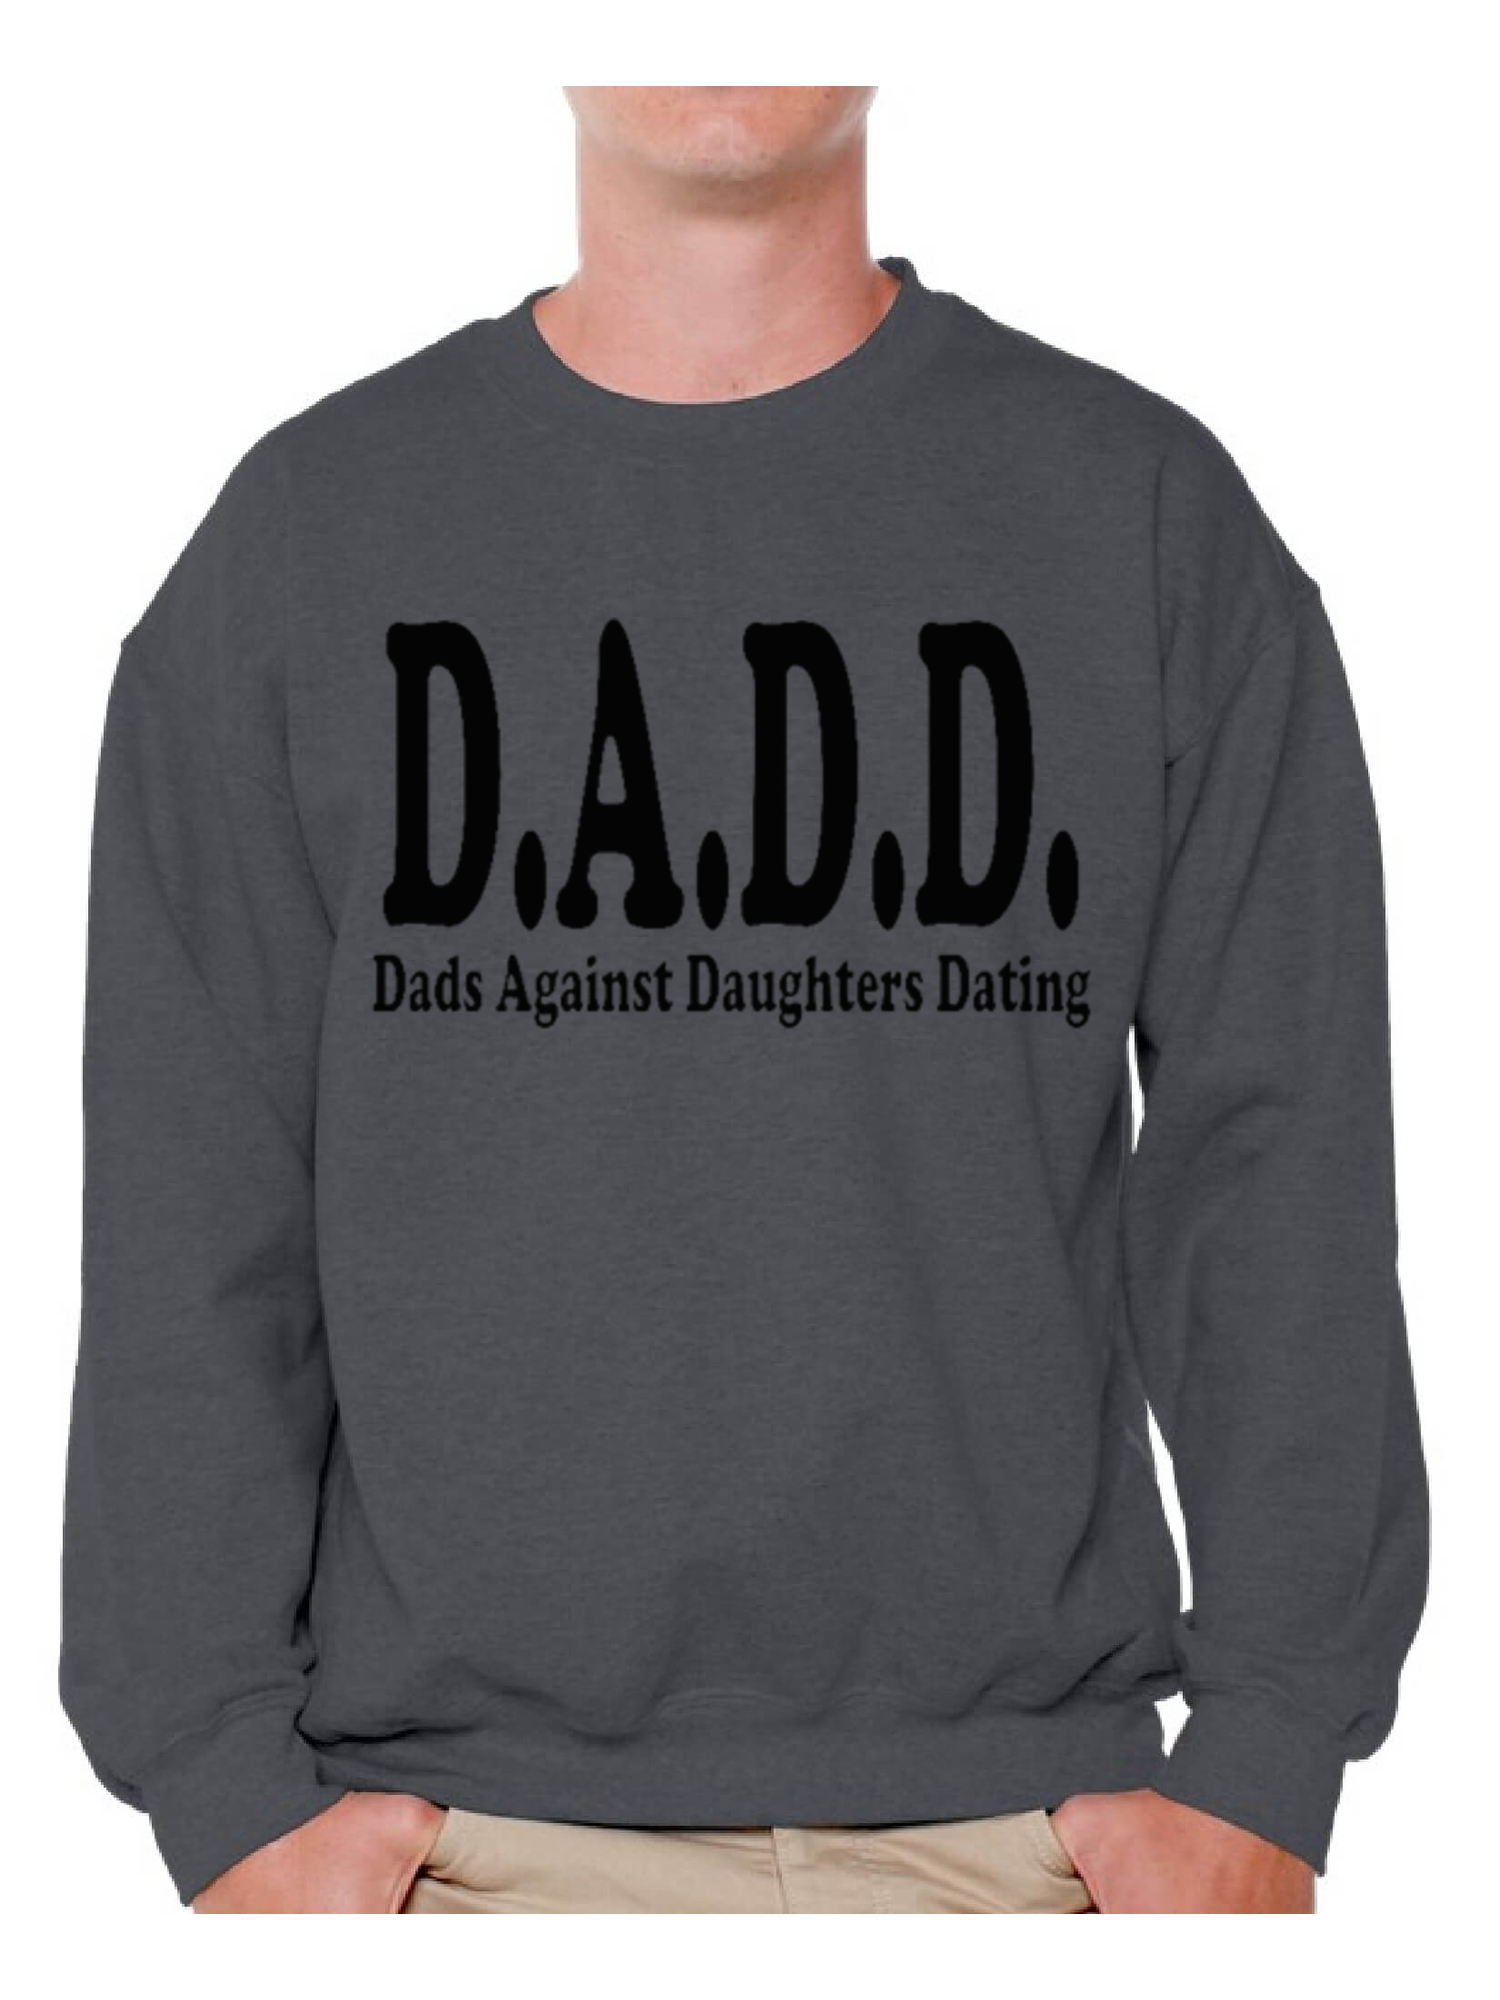 dads against daughters dating walmart